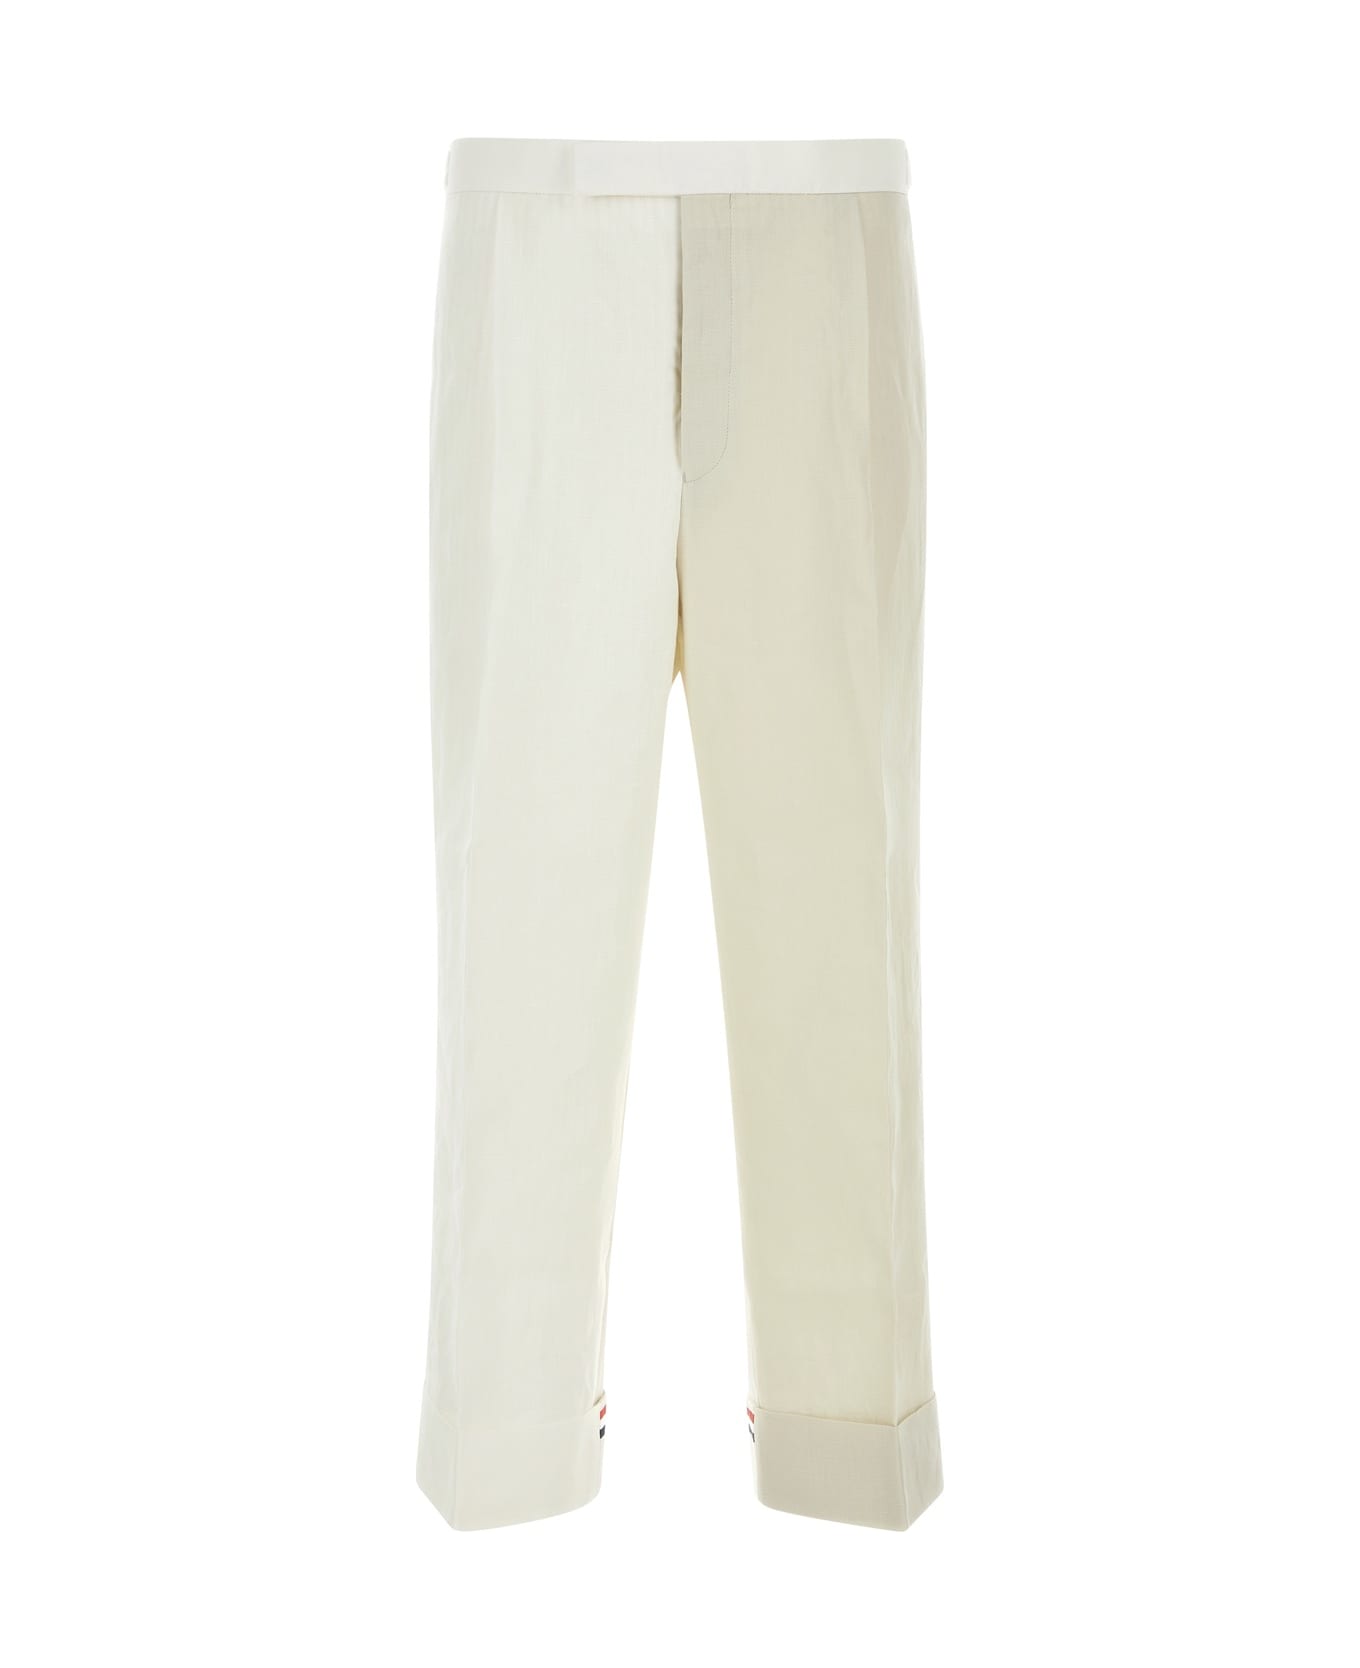 Thom Browne Two-tone Linen Pant - White ボトムス